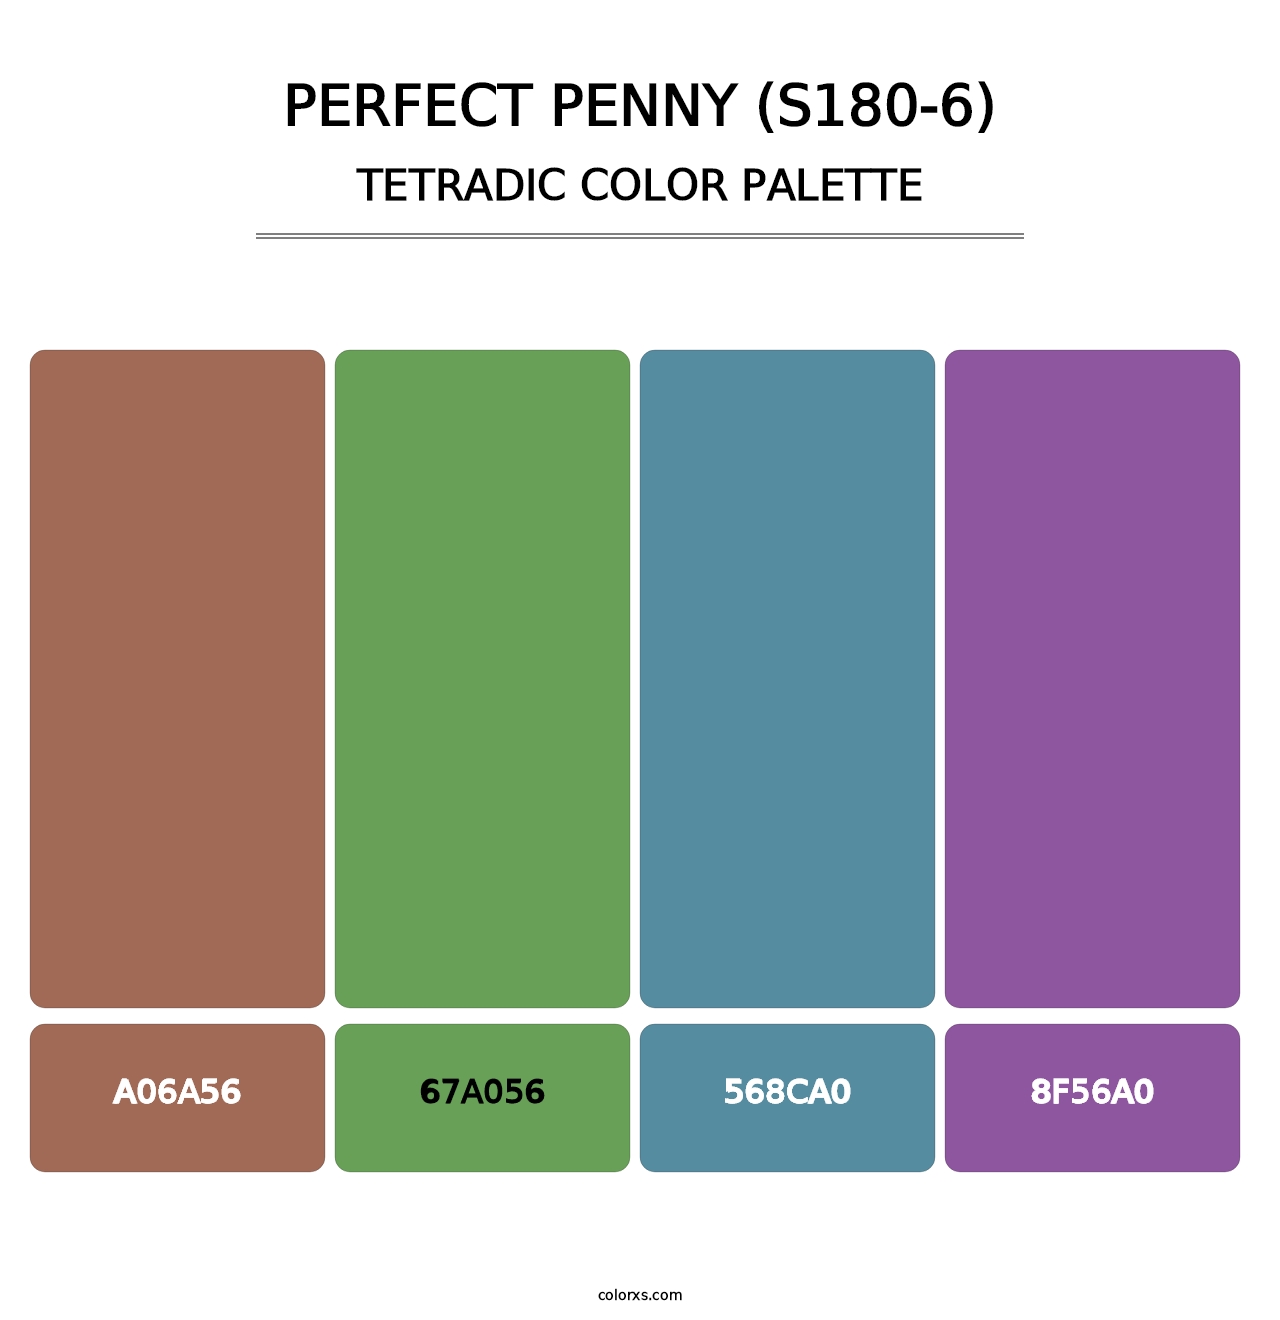 Perfect Penny (S180-6) - Tetradic Color Palette